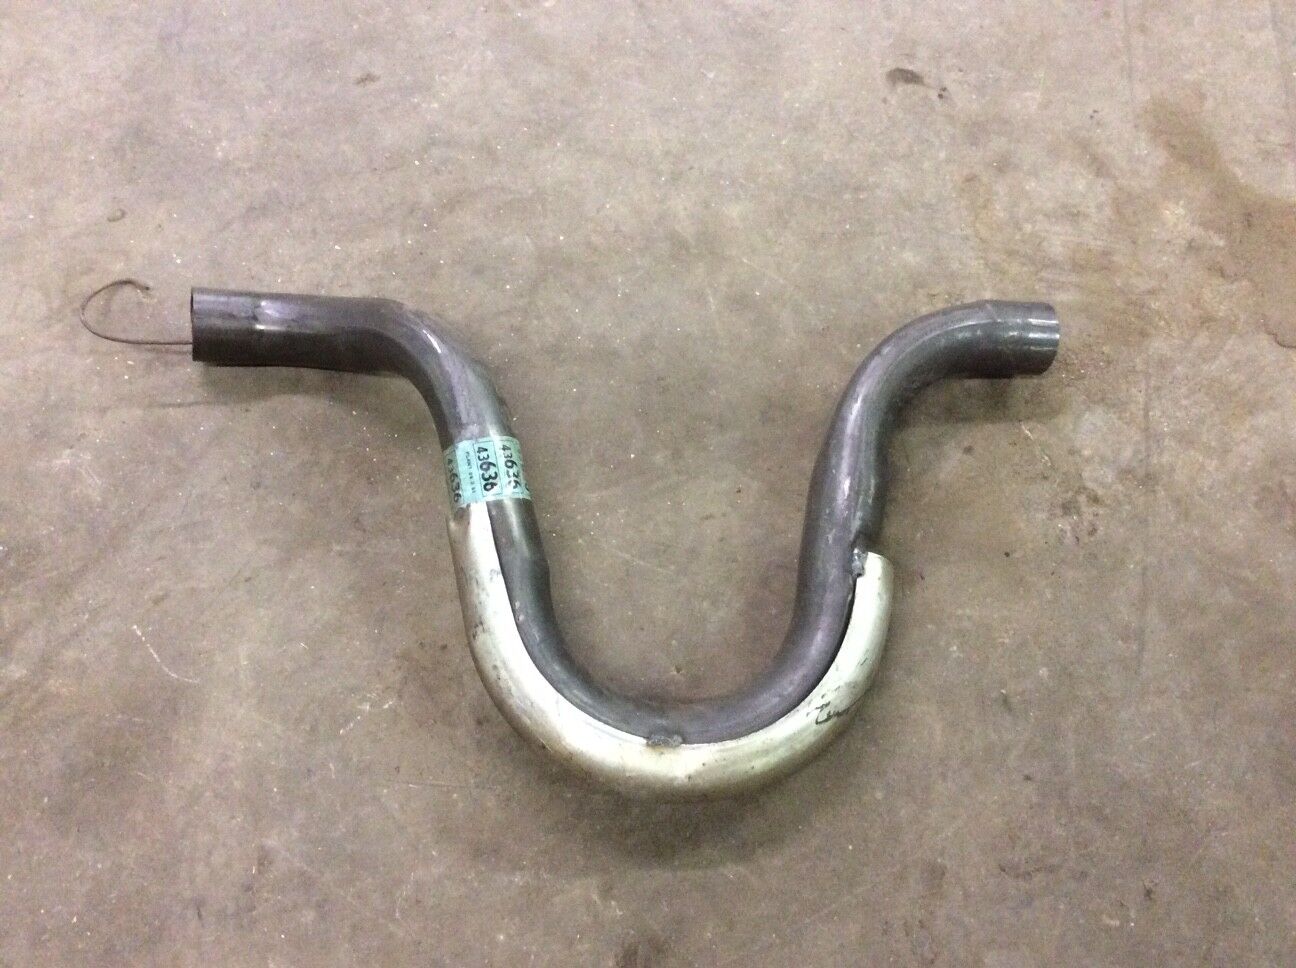 New Walker 43636 Exhaust Tail Pipe - Fits 1975 Dodge Monaco